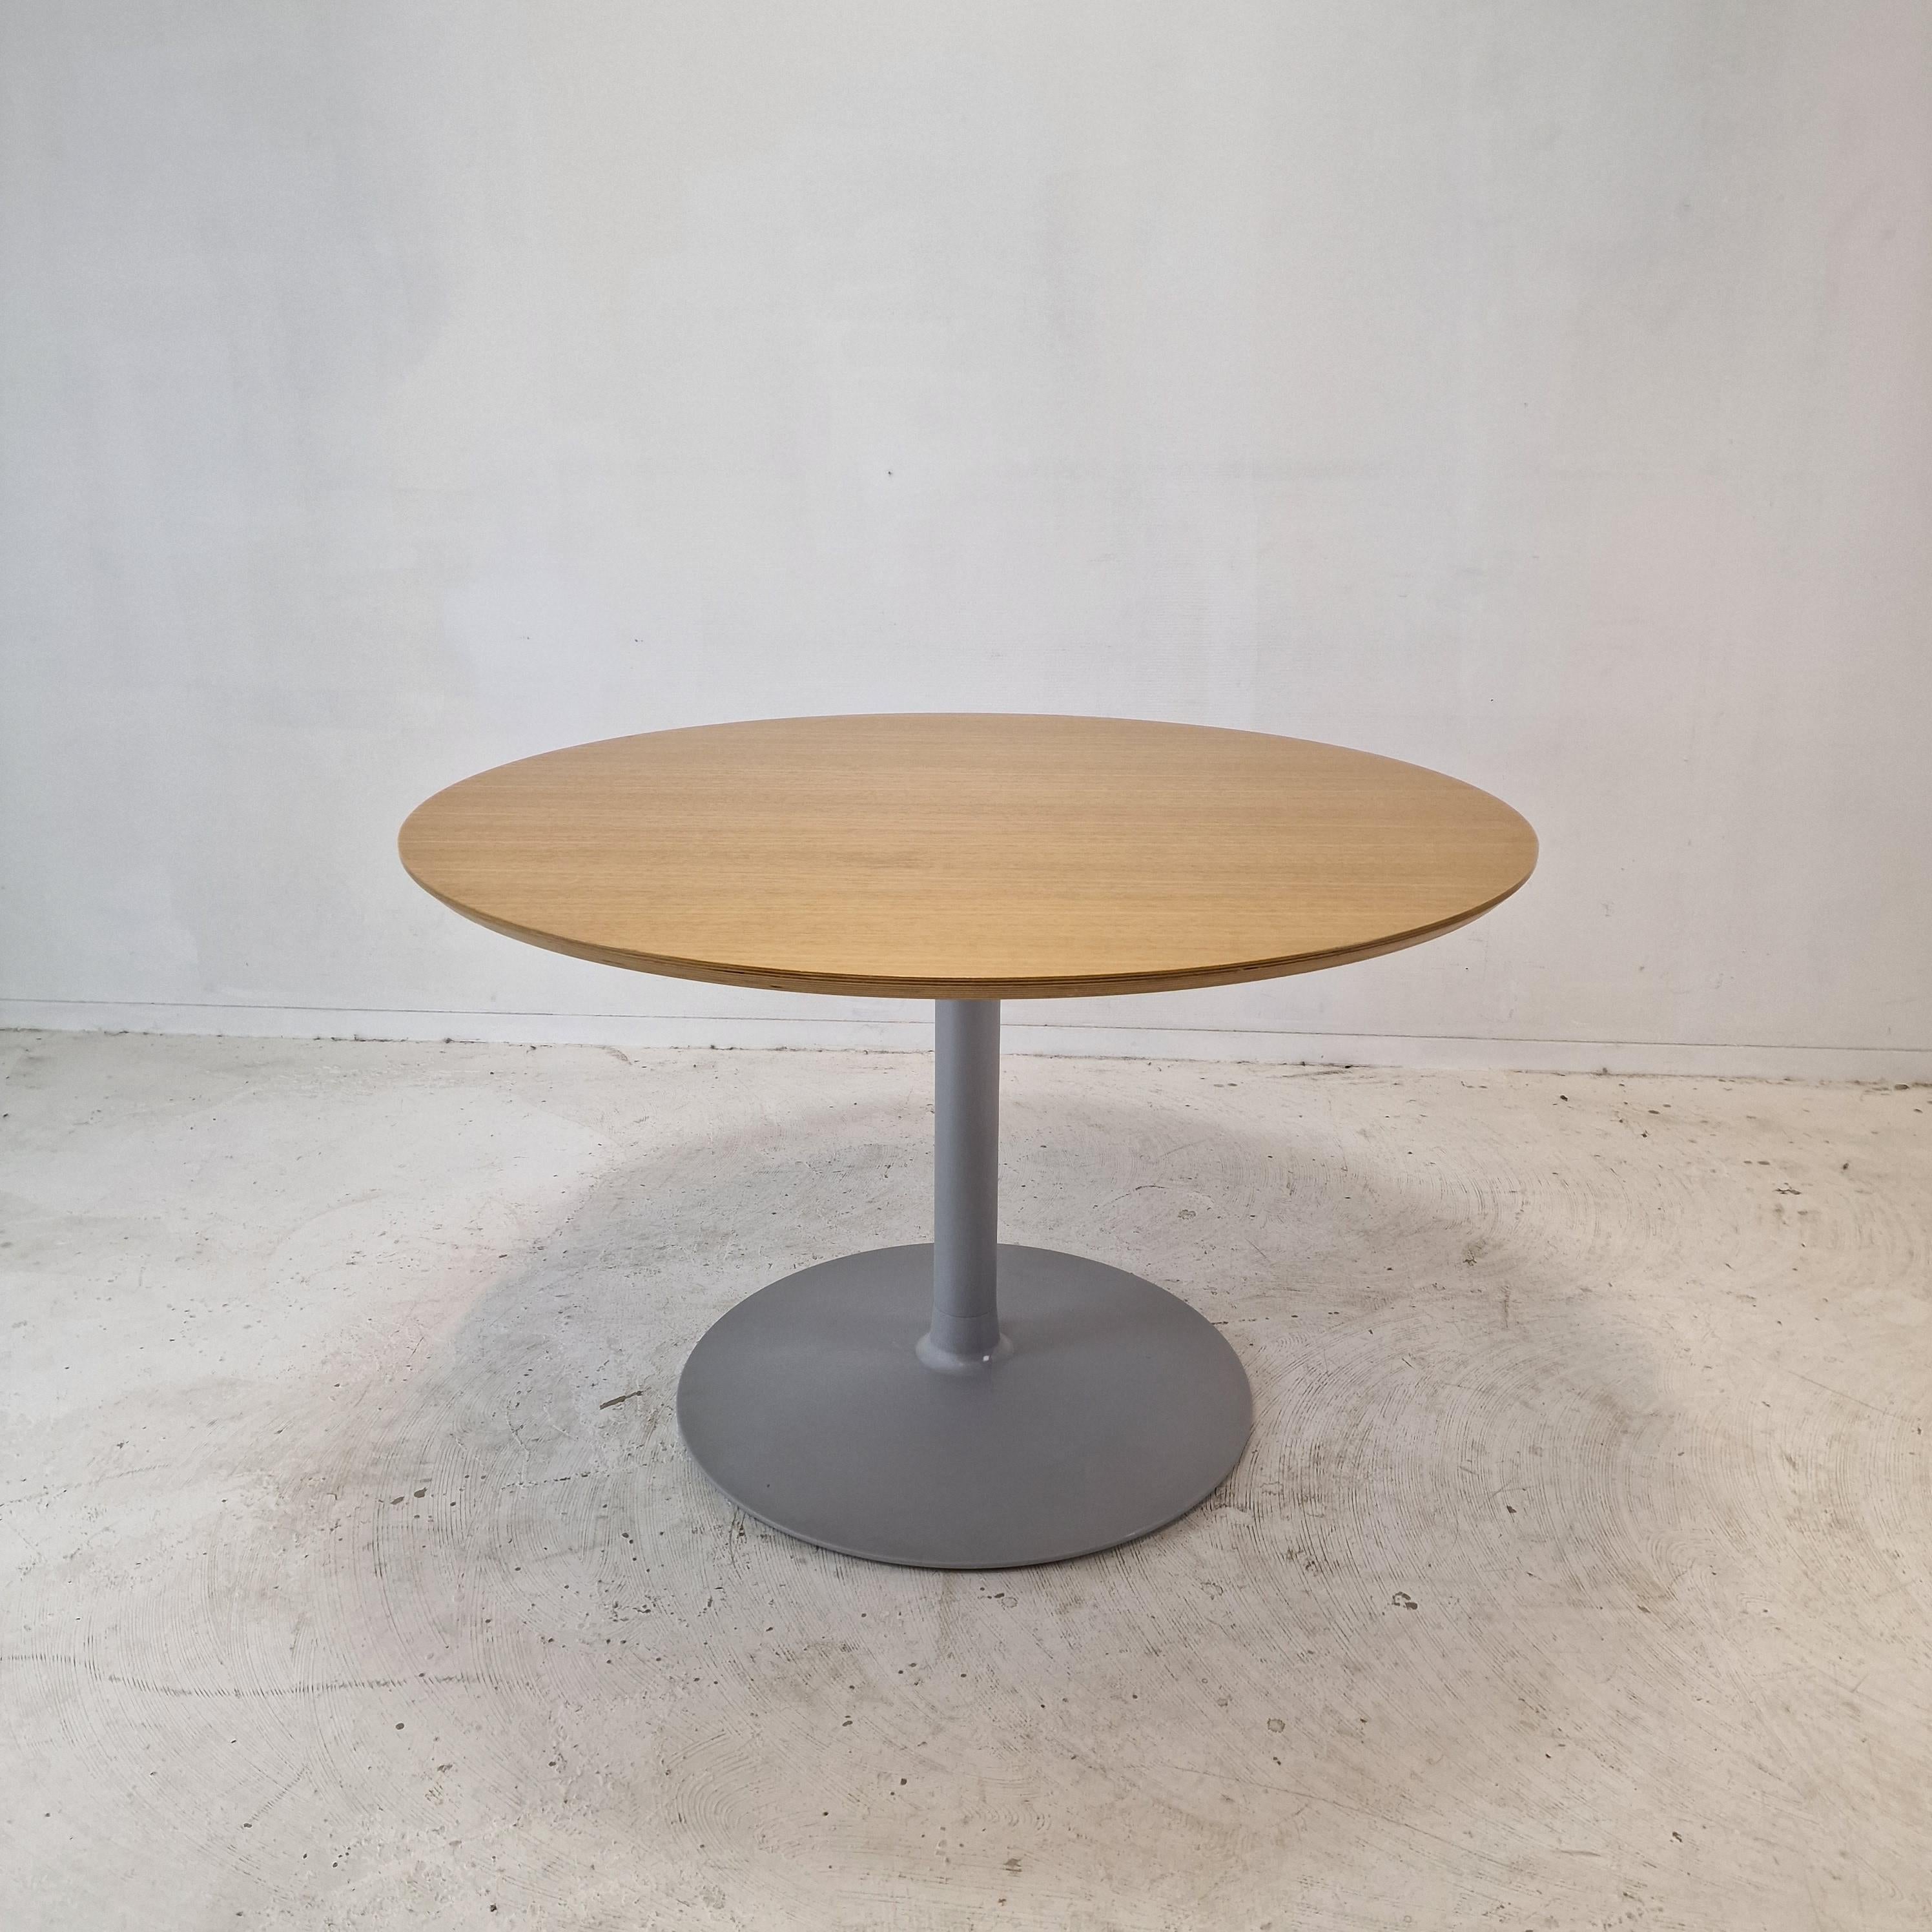 Very nice round dining table. 
Designed by the famous Pierre Paulin in the 60's for Artifort. 
This particular item is fabricated in 2019.

Very stable foot in the color grey with a wooden plated top. 

The table is in very good condition with the